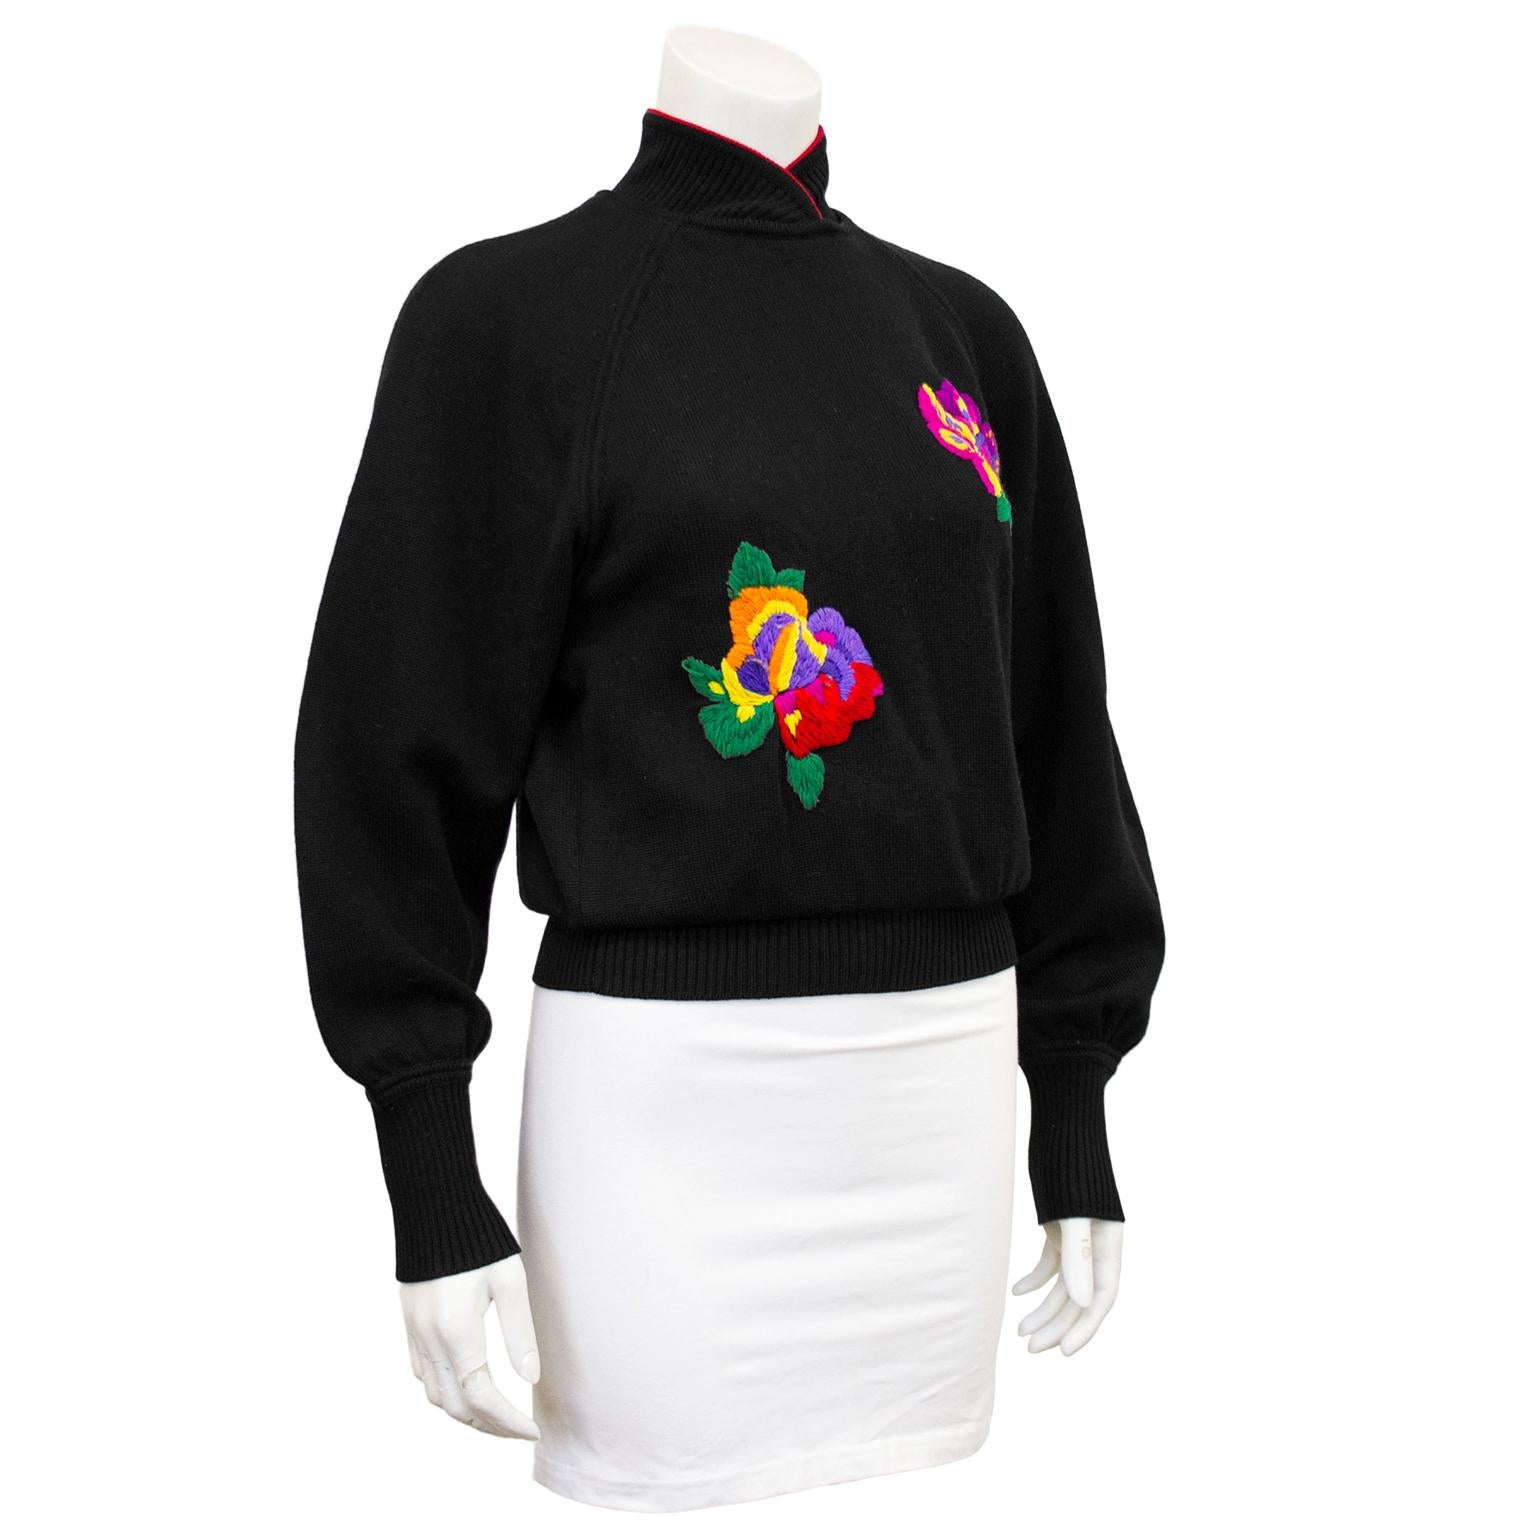 1980s Ungaro knit mandarin collar sweater. Black with red trim at the neck and bright multicolour embroidered flowers. Ribbed neckline, cuffs and waist band. Three small black button closures at nape of neck with small keyhole. Slight blouson fit.